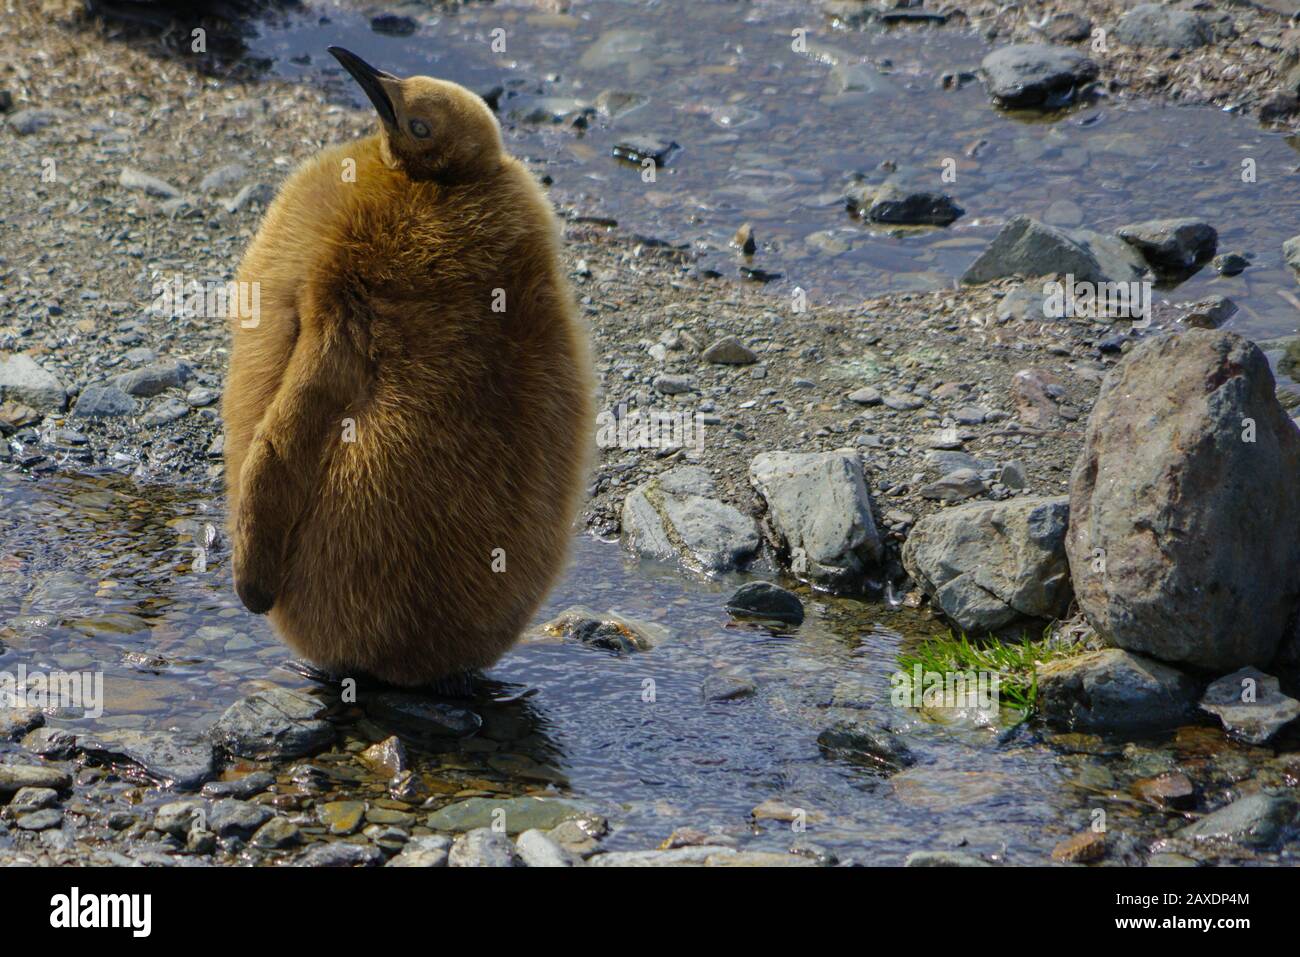 Baby king penguins of souther regions Stock Photo